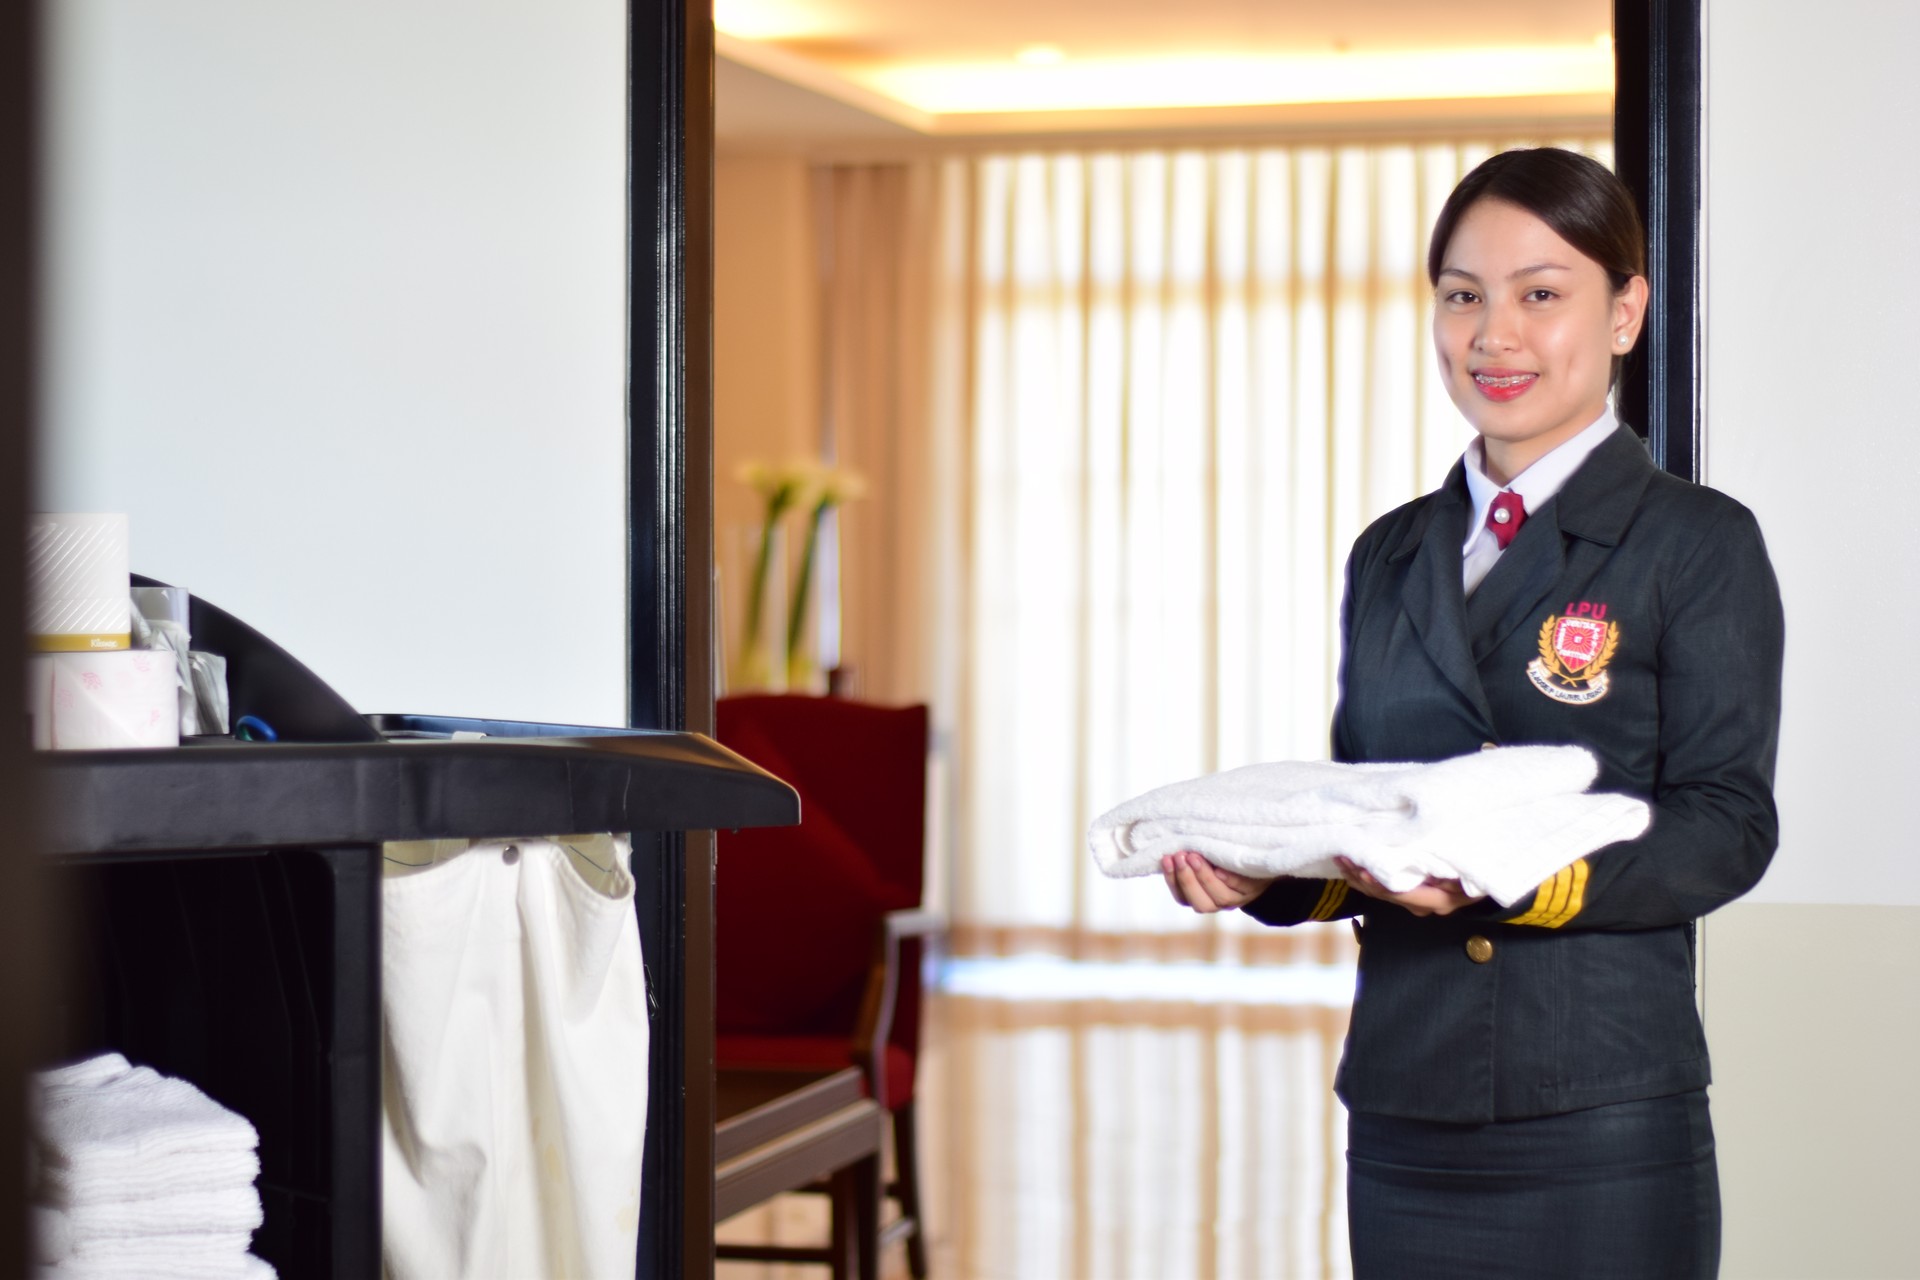 hotel administration in cruise line operations